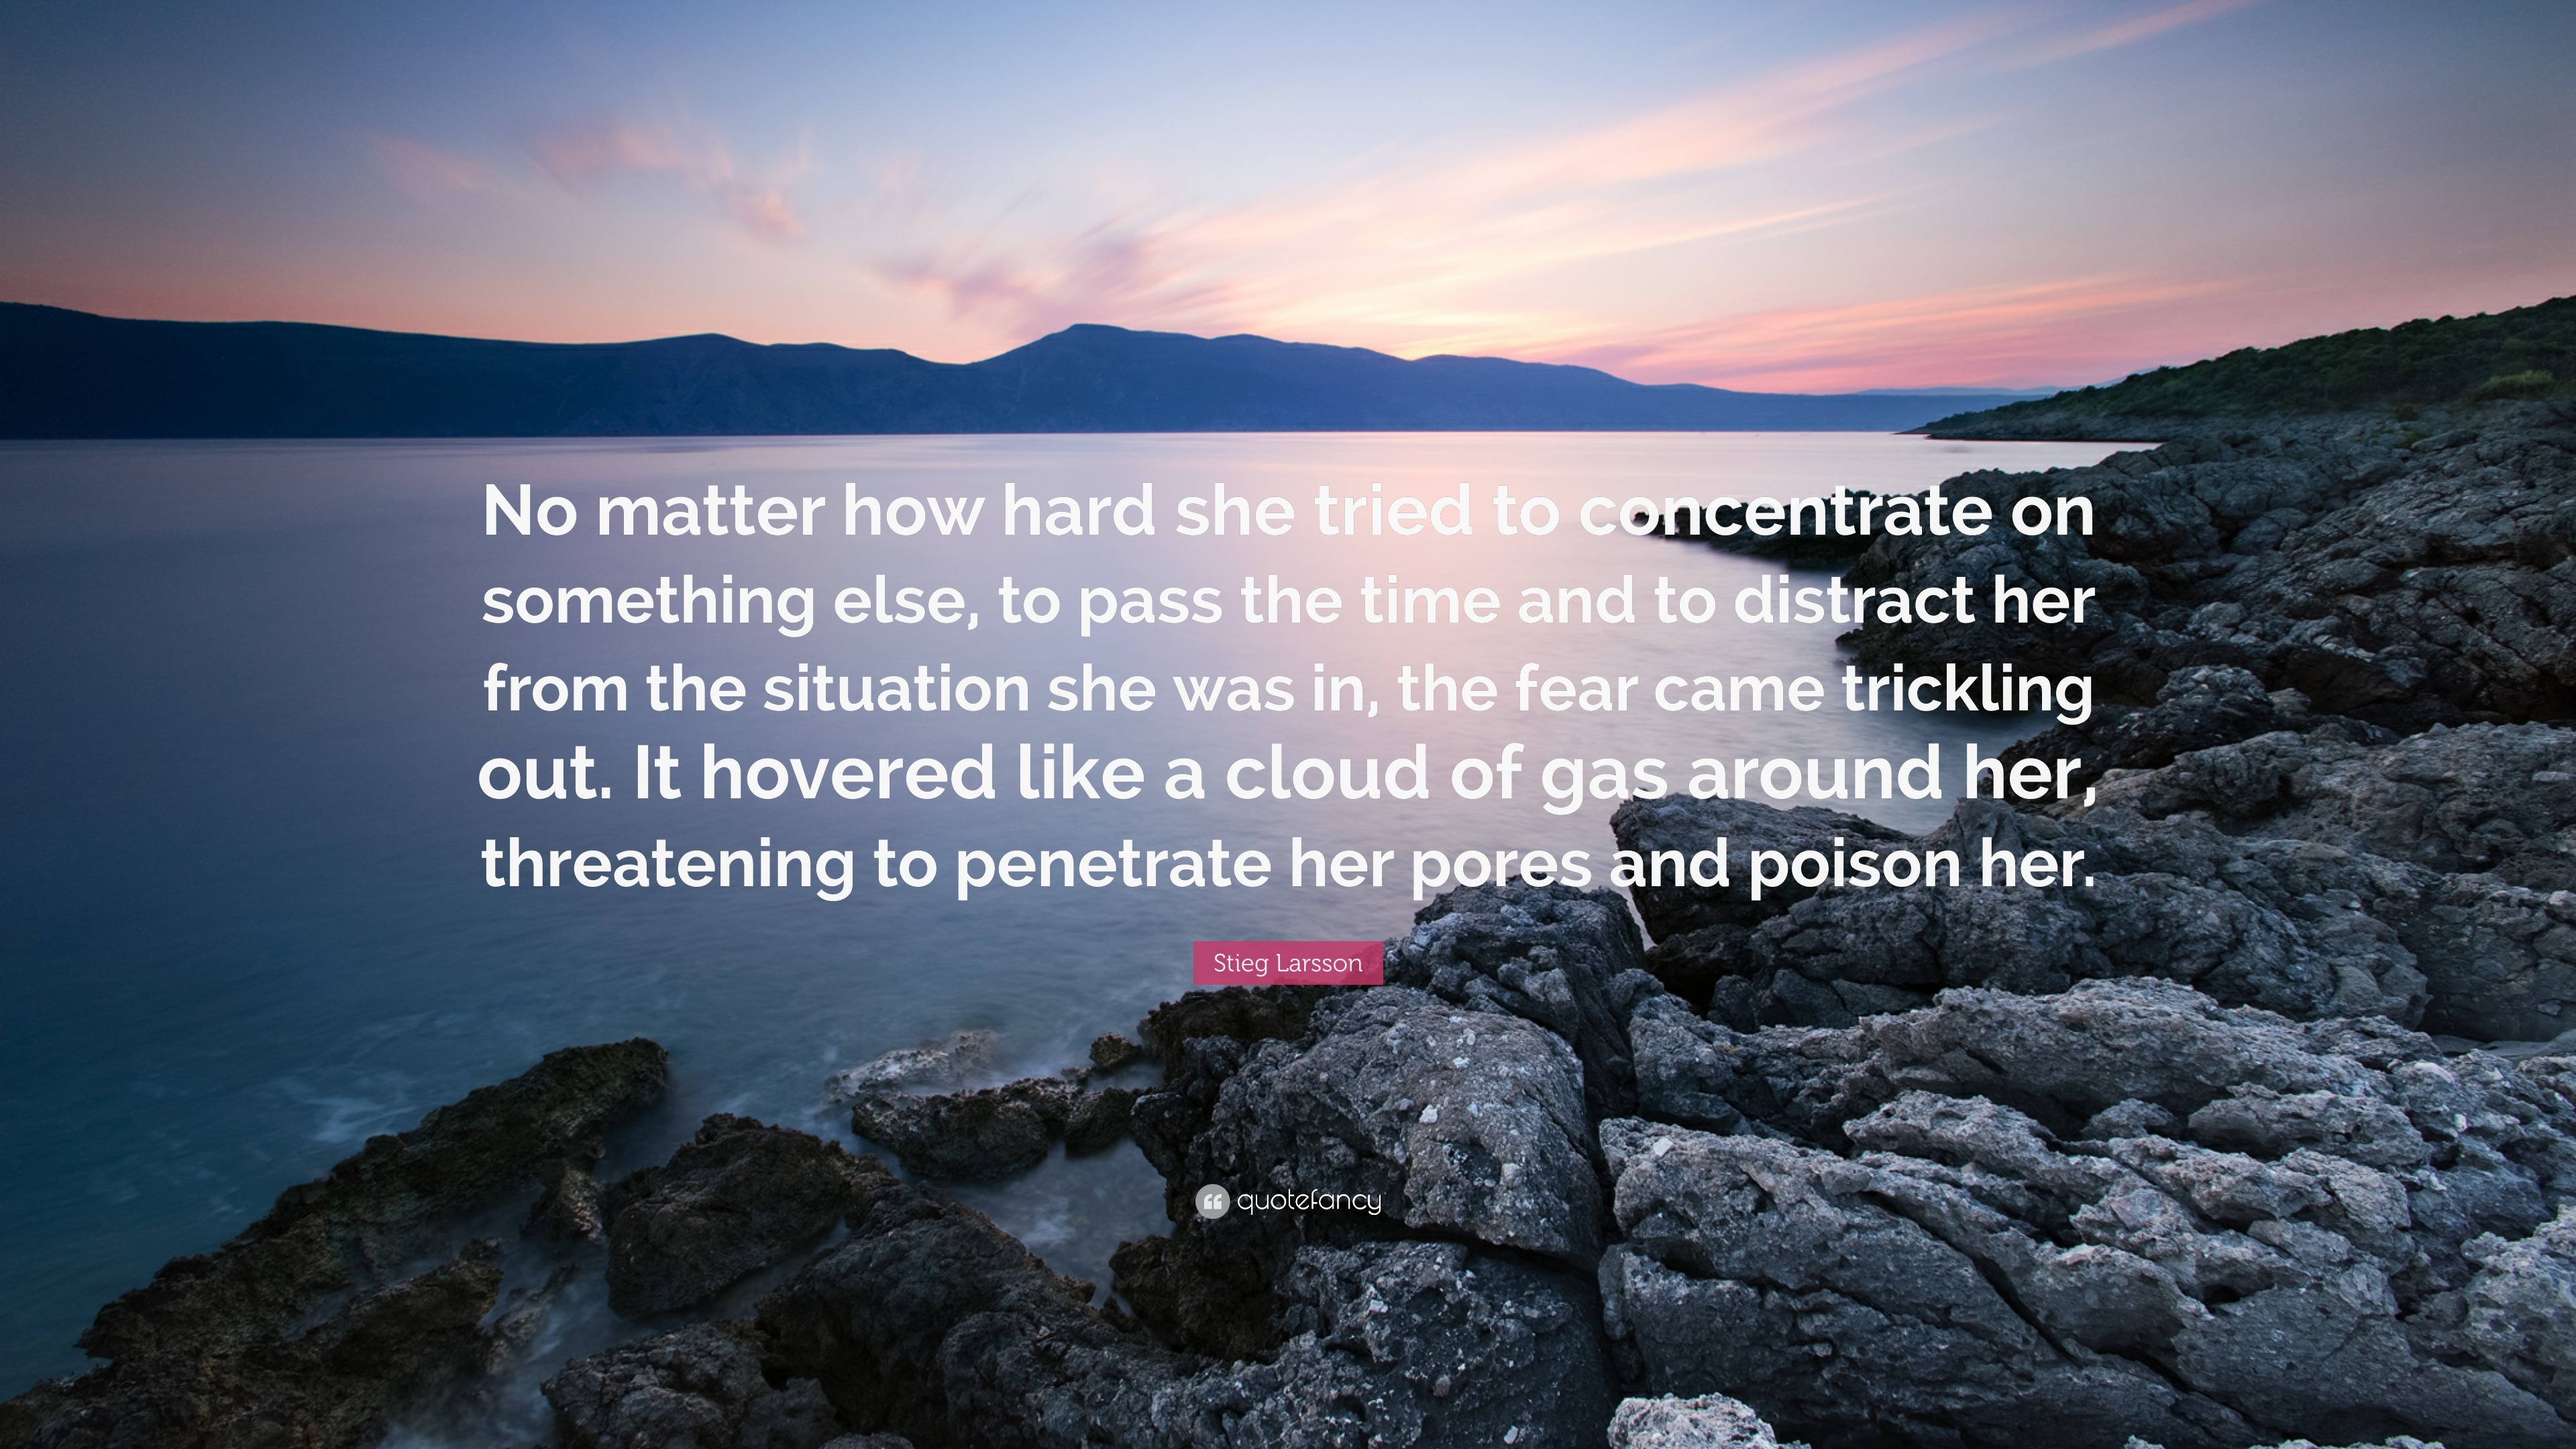 Stieg Larsson Quote: “No matter how hard she tried to concentrate on ...